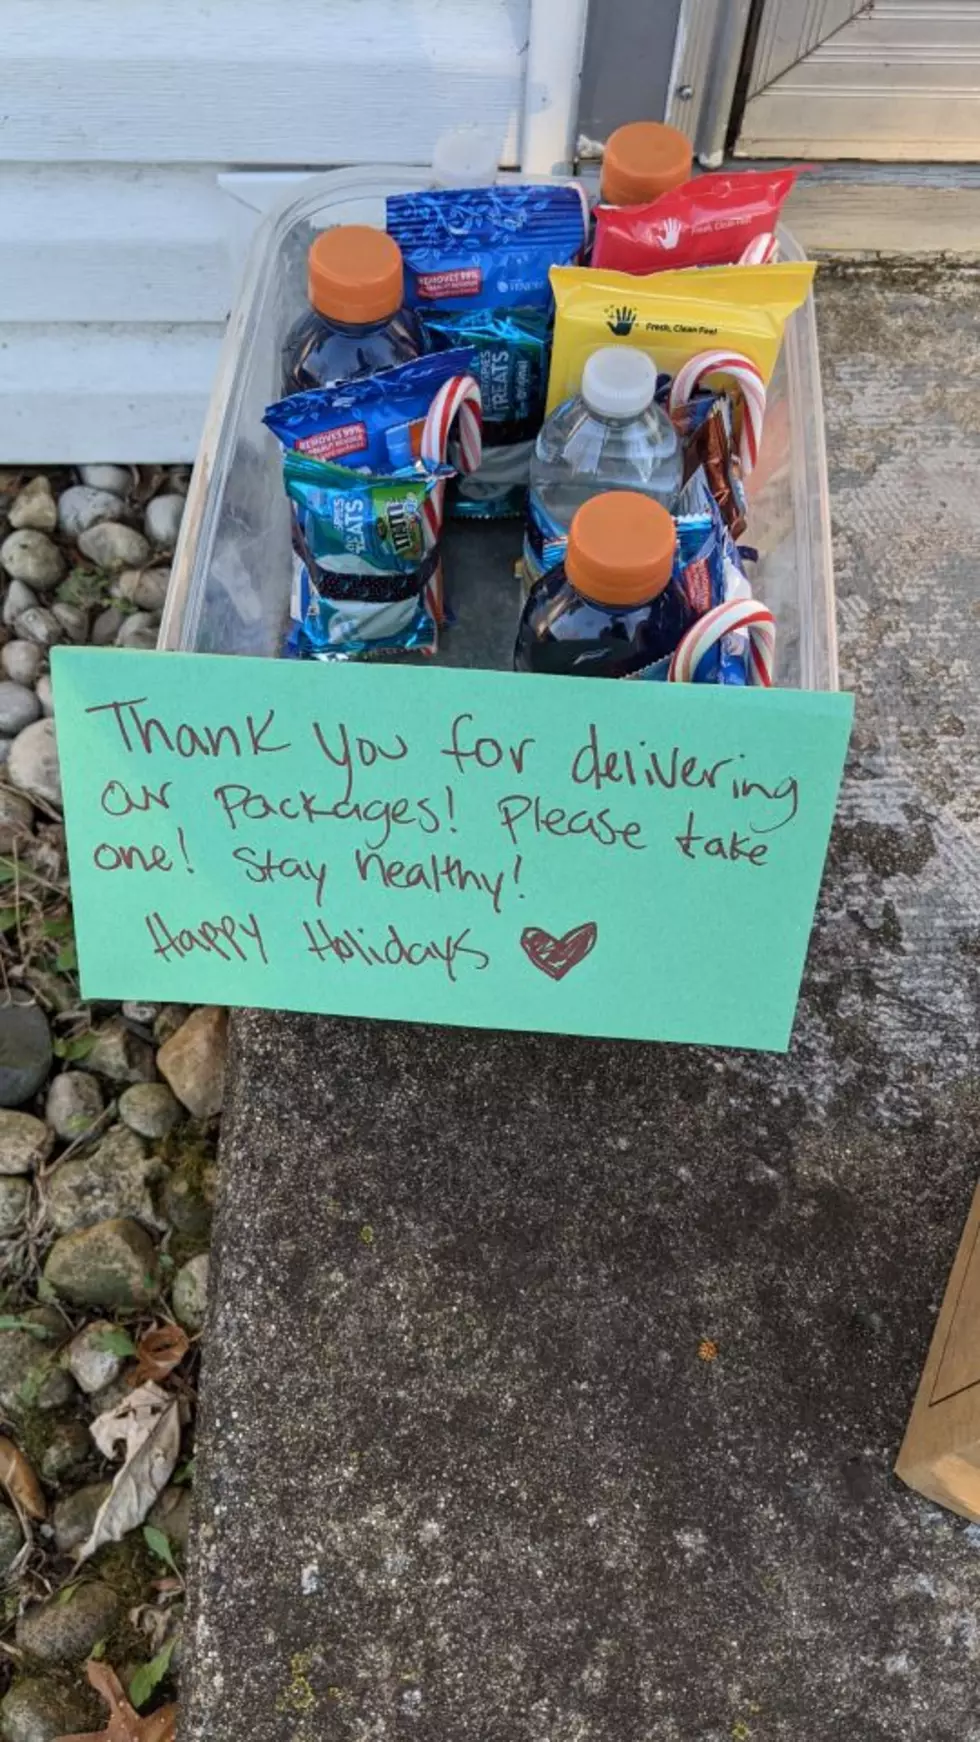 Local Package Courier Shares Sweet Goodies Left Out by Rockford Family